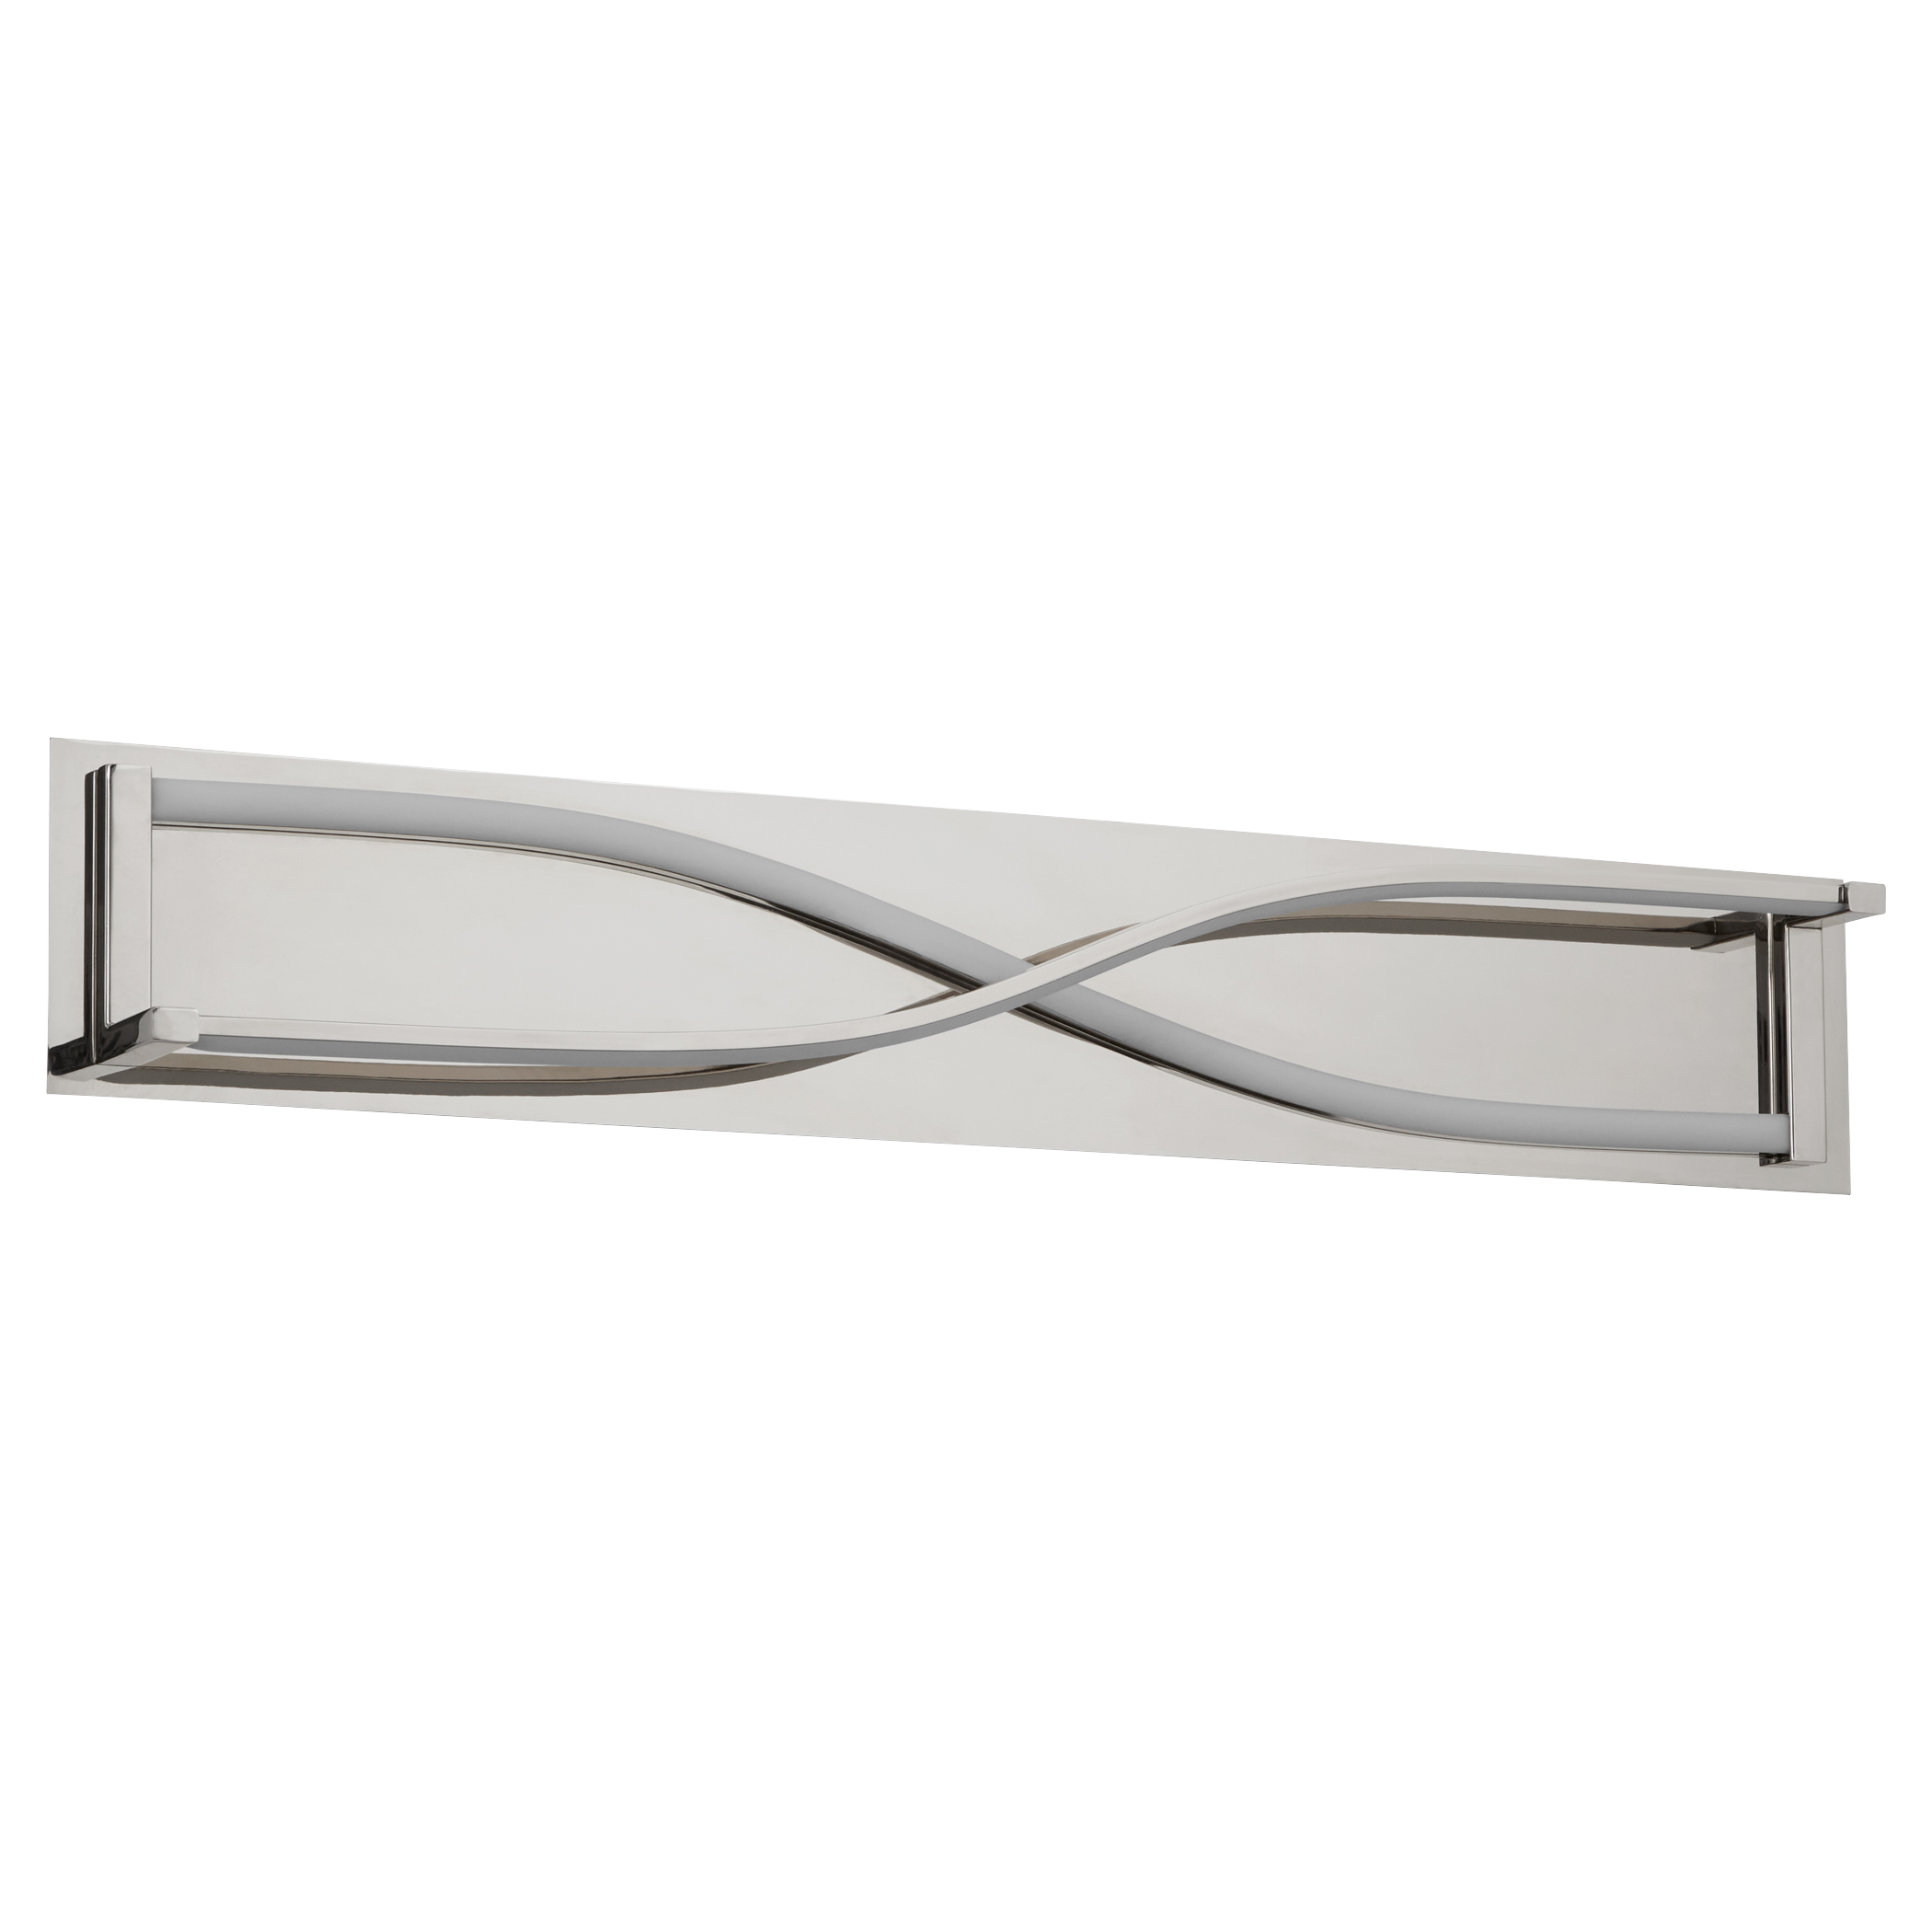 HYPERION 34" CCT Vanity - Polished Nickel - 3-5007-20